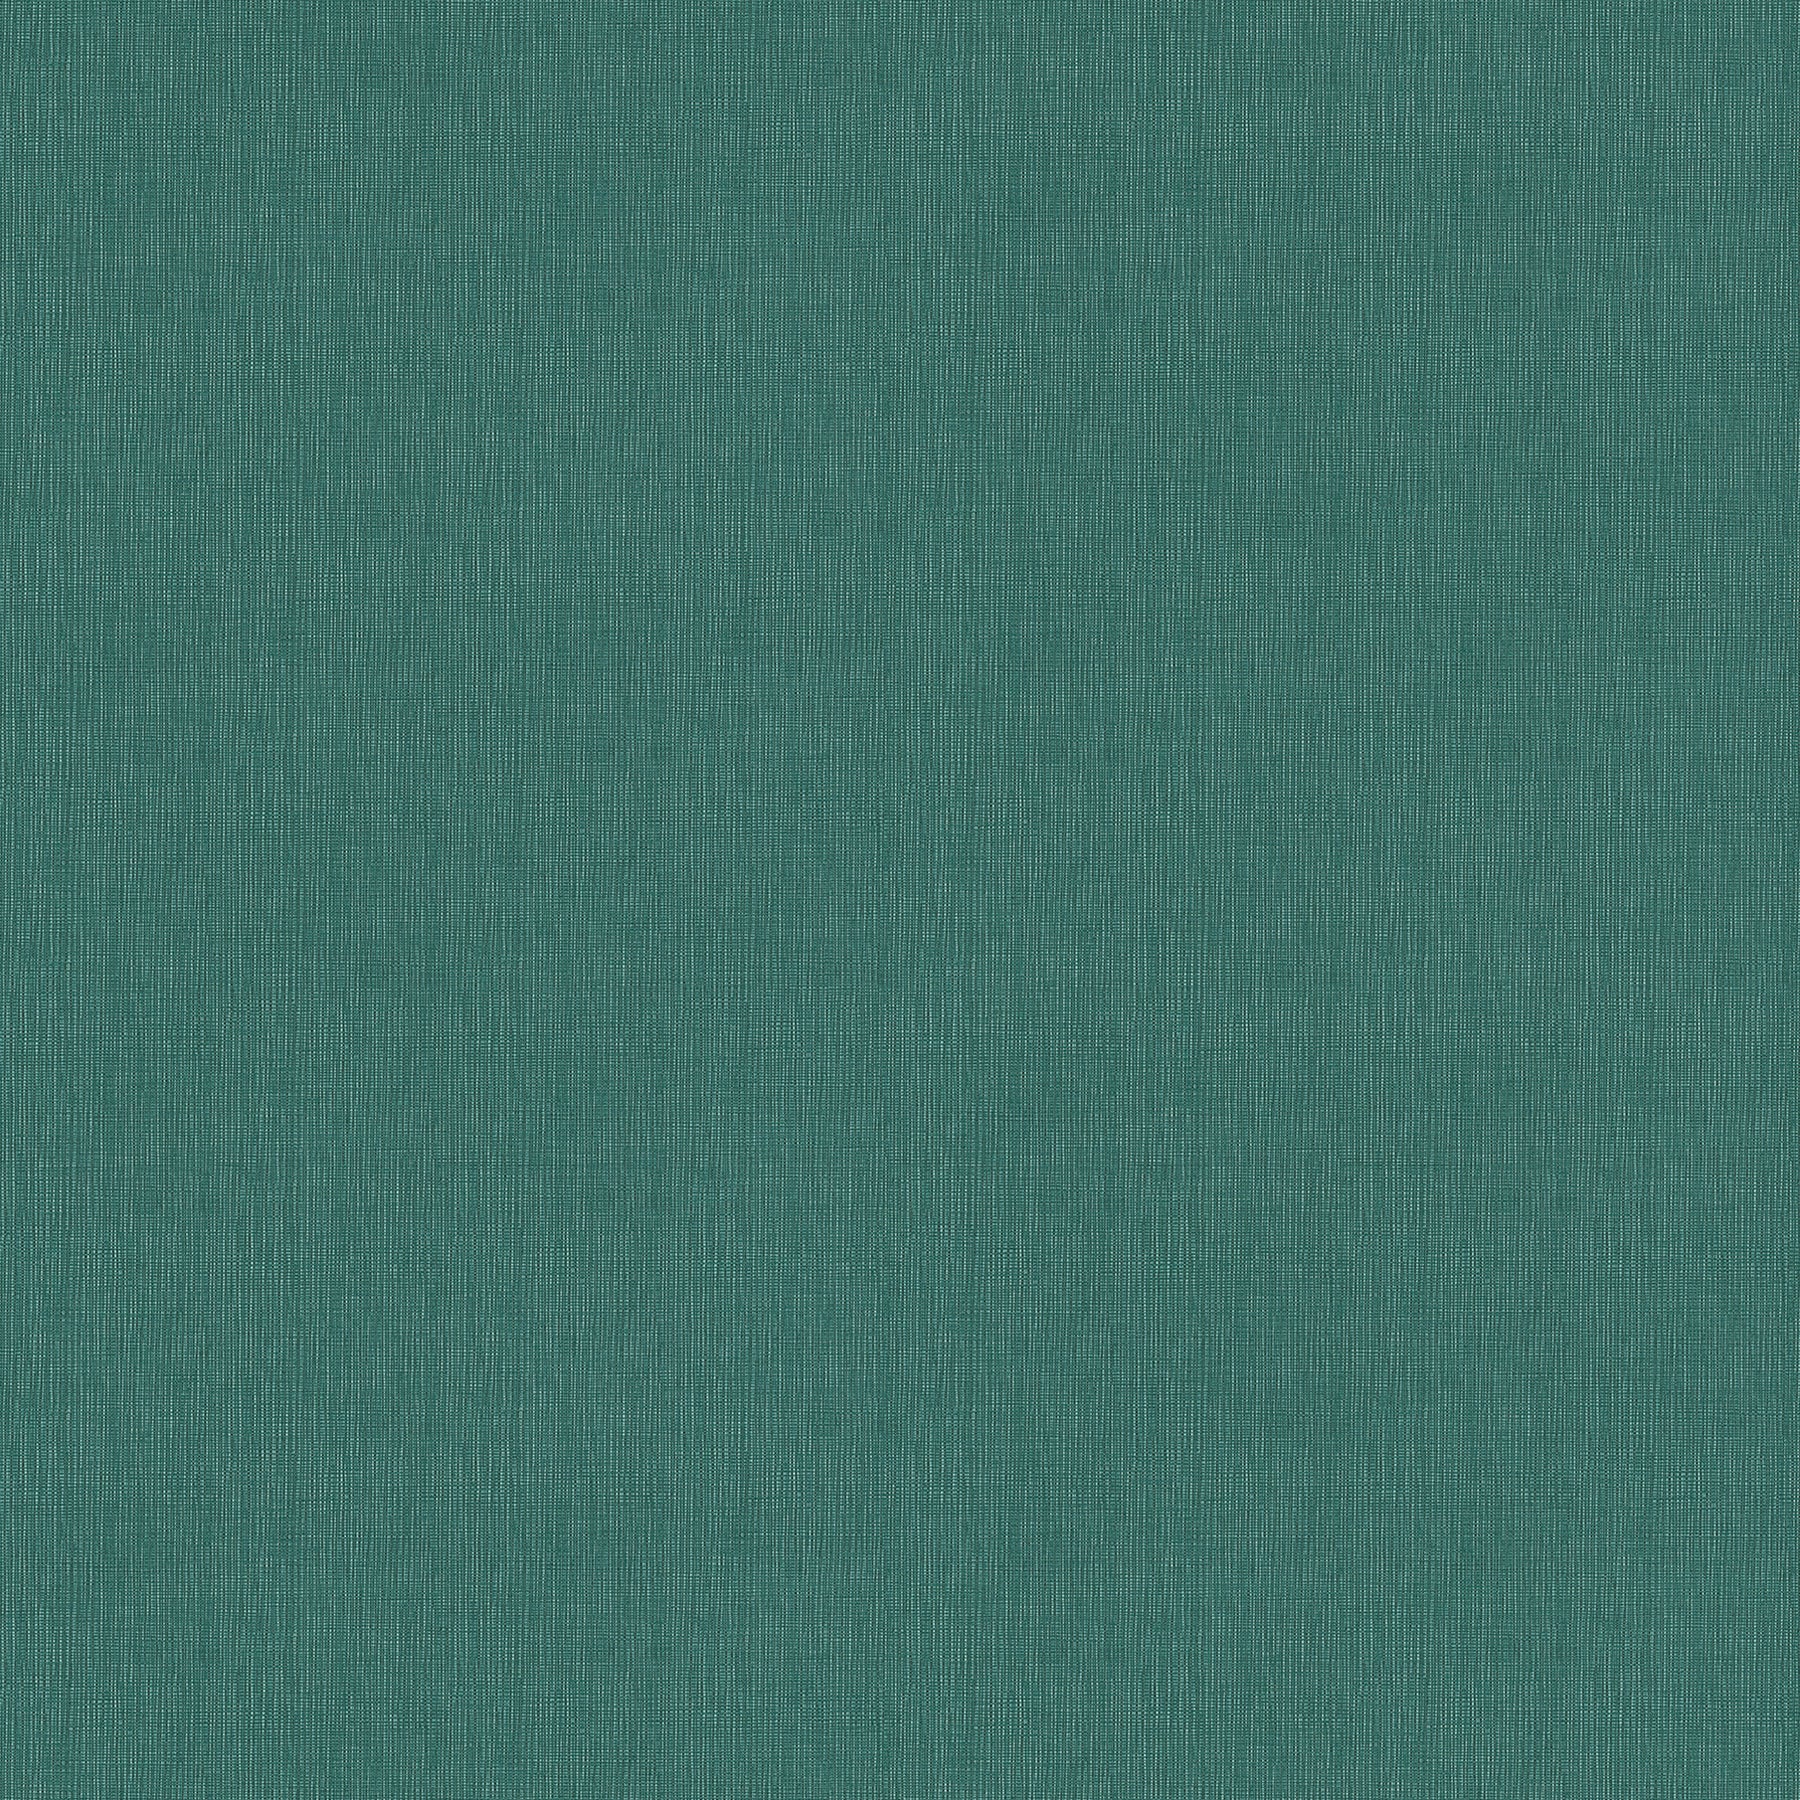 Acquire 4015-36977-1 Beyond Textures Seaton Sea Green Linen Texture Sea Green by Advantage